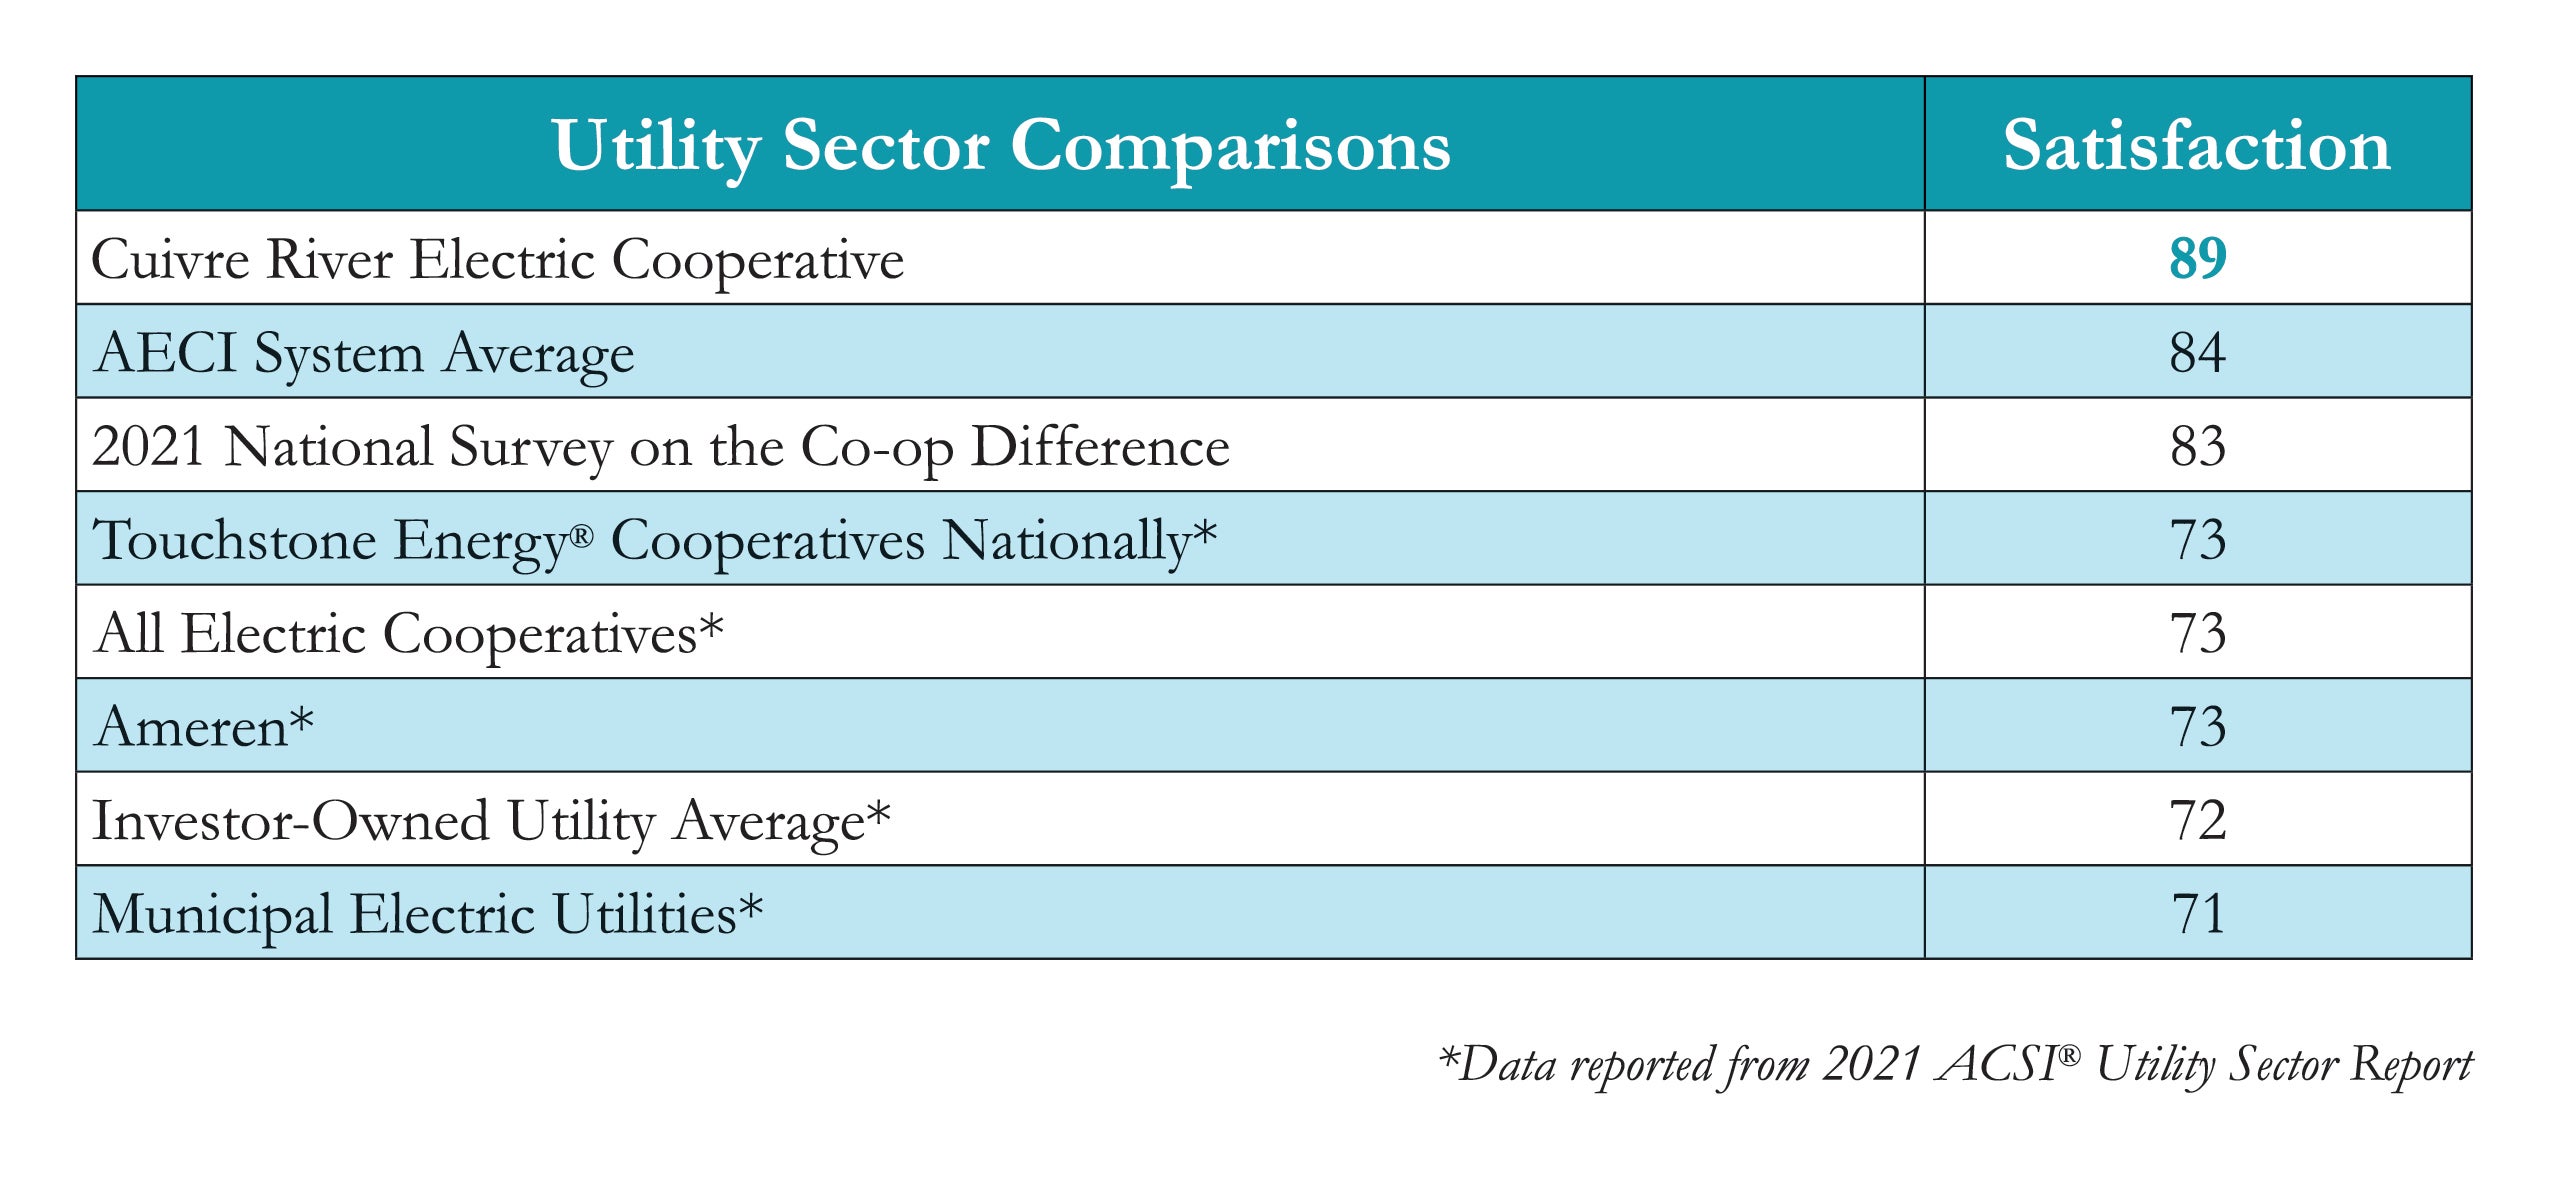 Utility Sector Comparisons